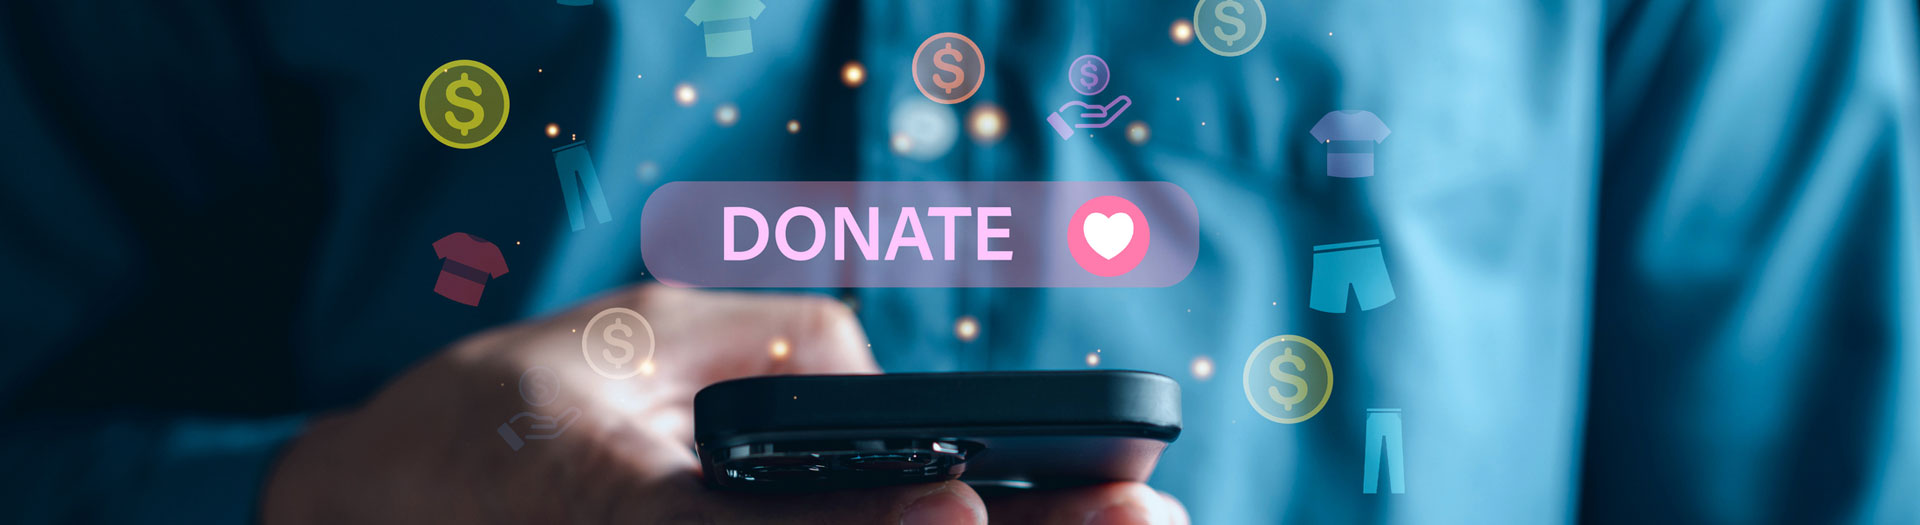 A person's hands holding a smartphone with a digital "DONATE" button and heart icon displayed on screen, surrounded by various floating icons representing money and clothing, symbolizing online charitable giving